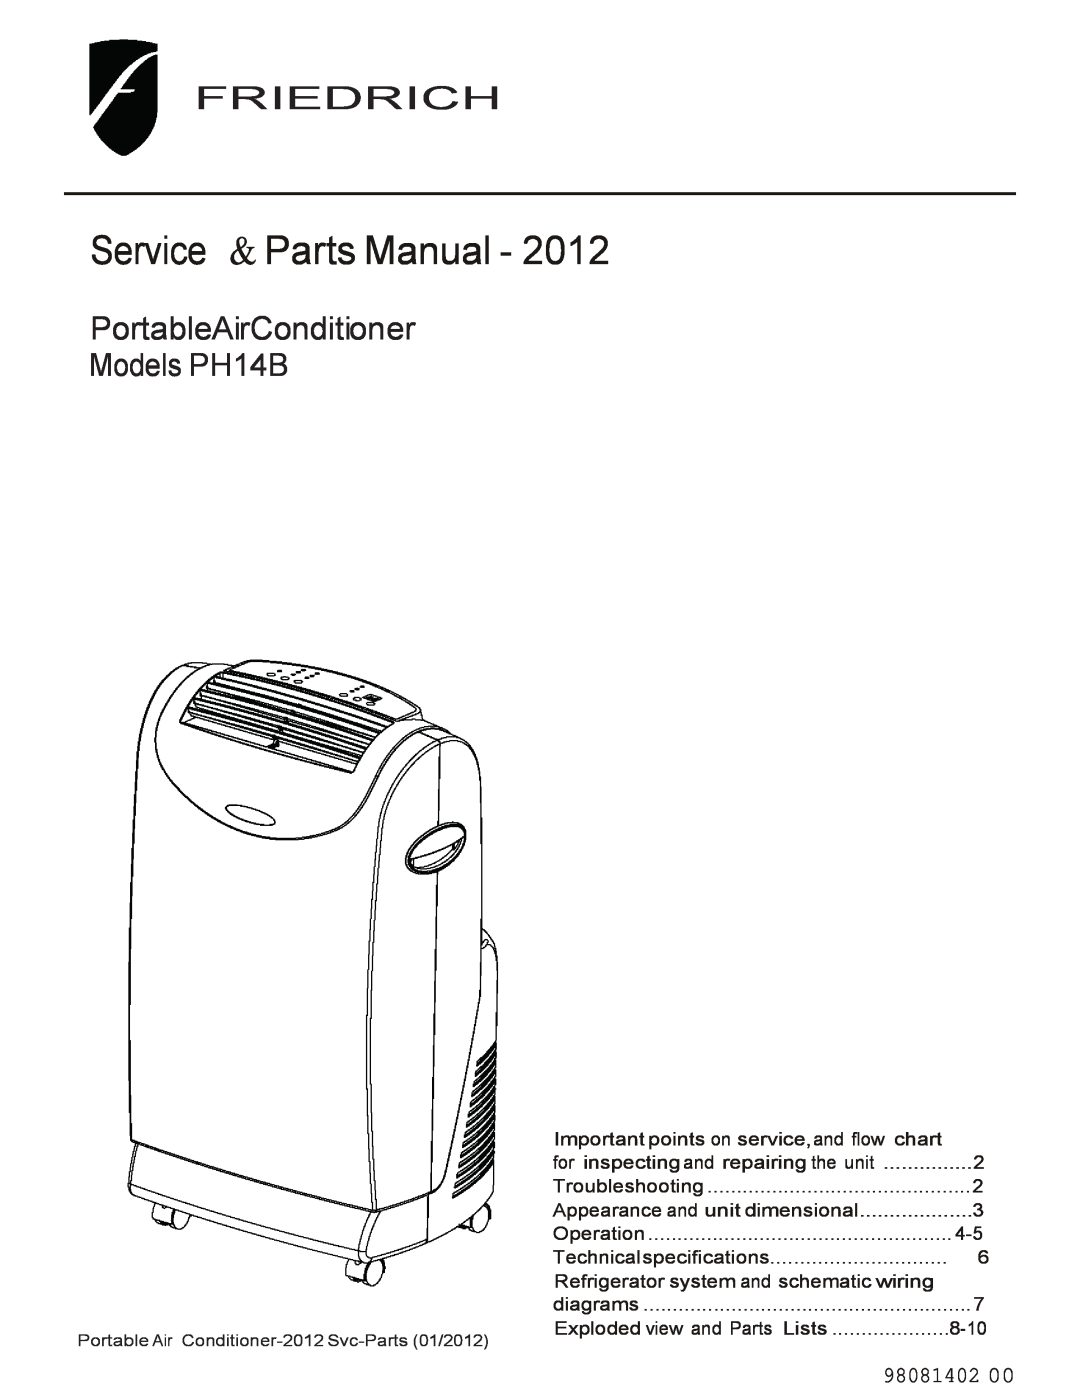 Friedrich Models PH14B technical specifications Service & Parts Manual, PortableAirConditioner, Friedrich, 98081402 